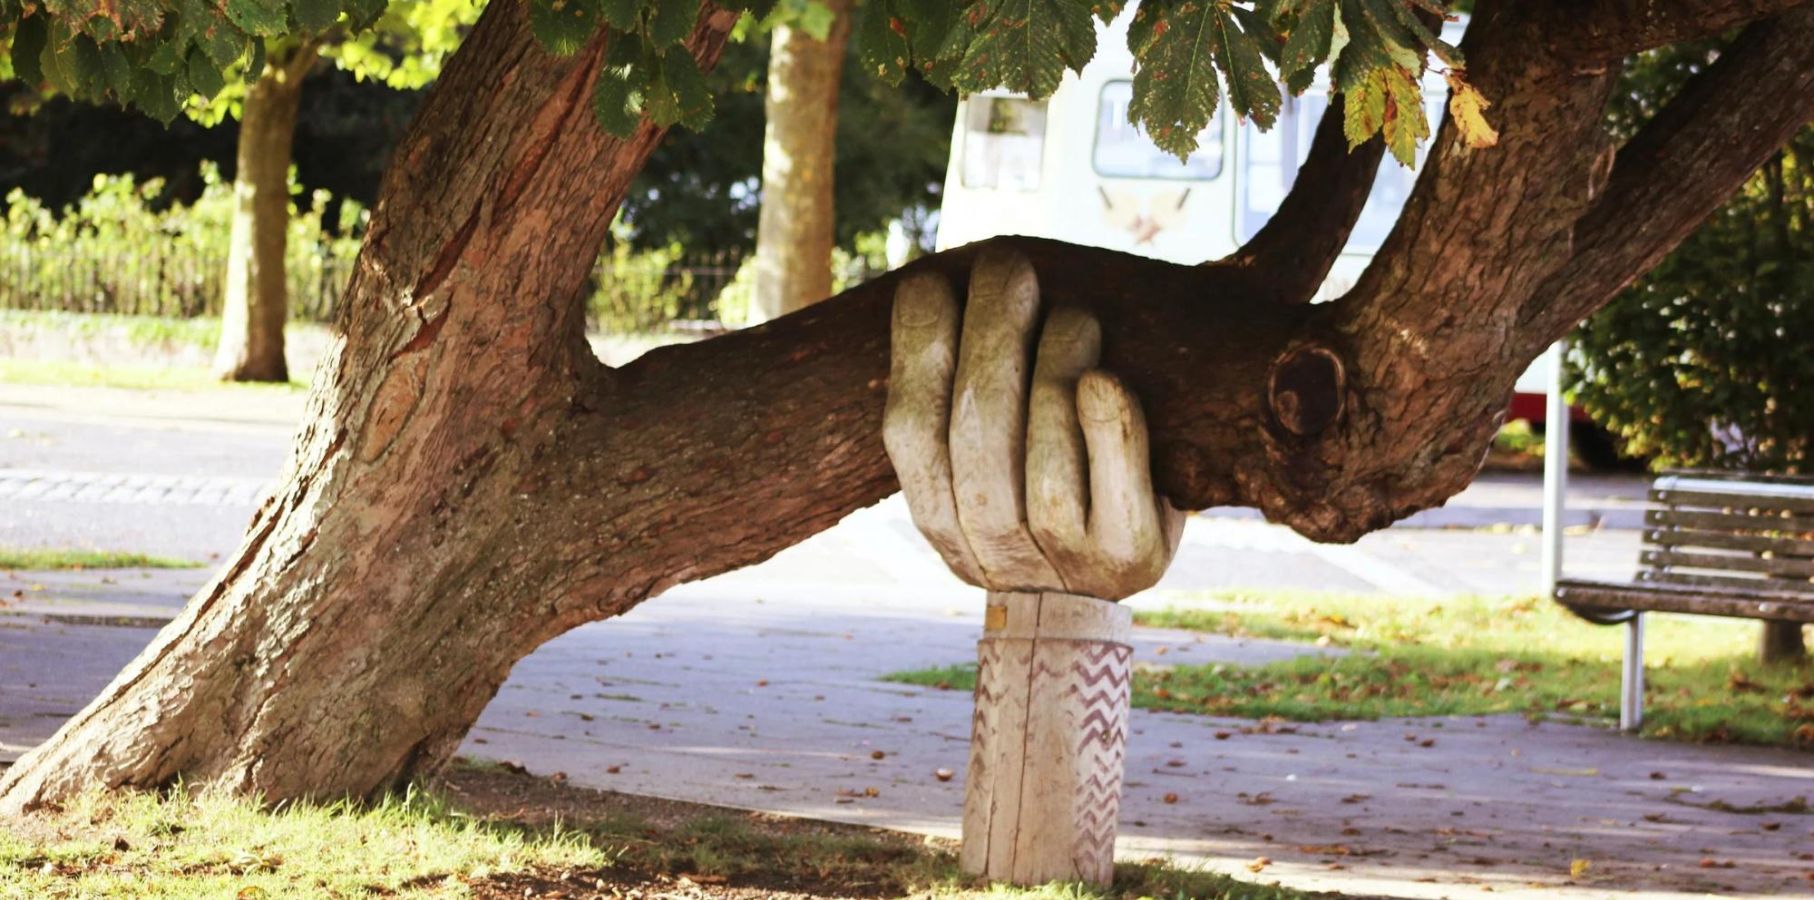 Sculpture of a large hand holding up a large tree limb